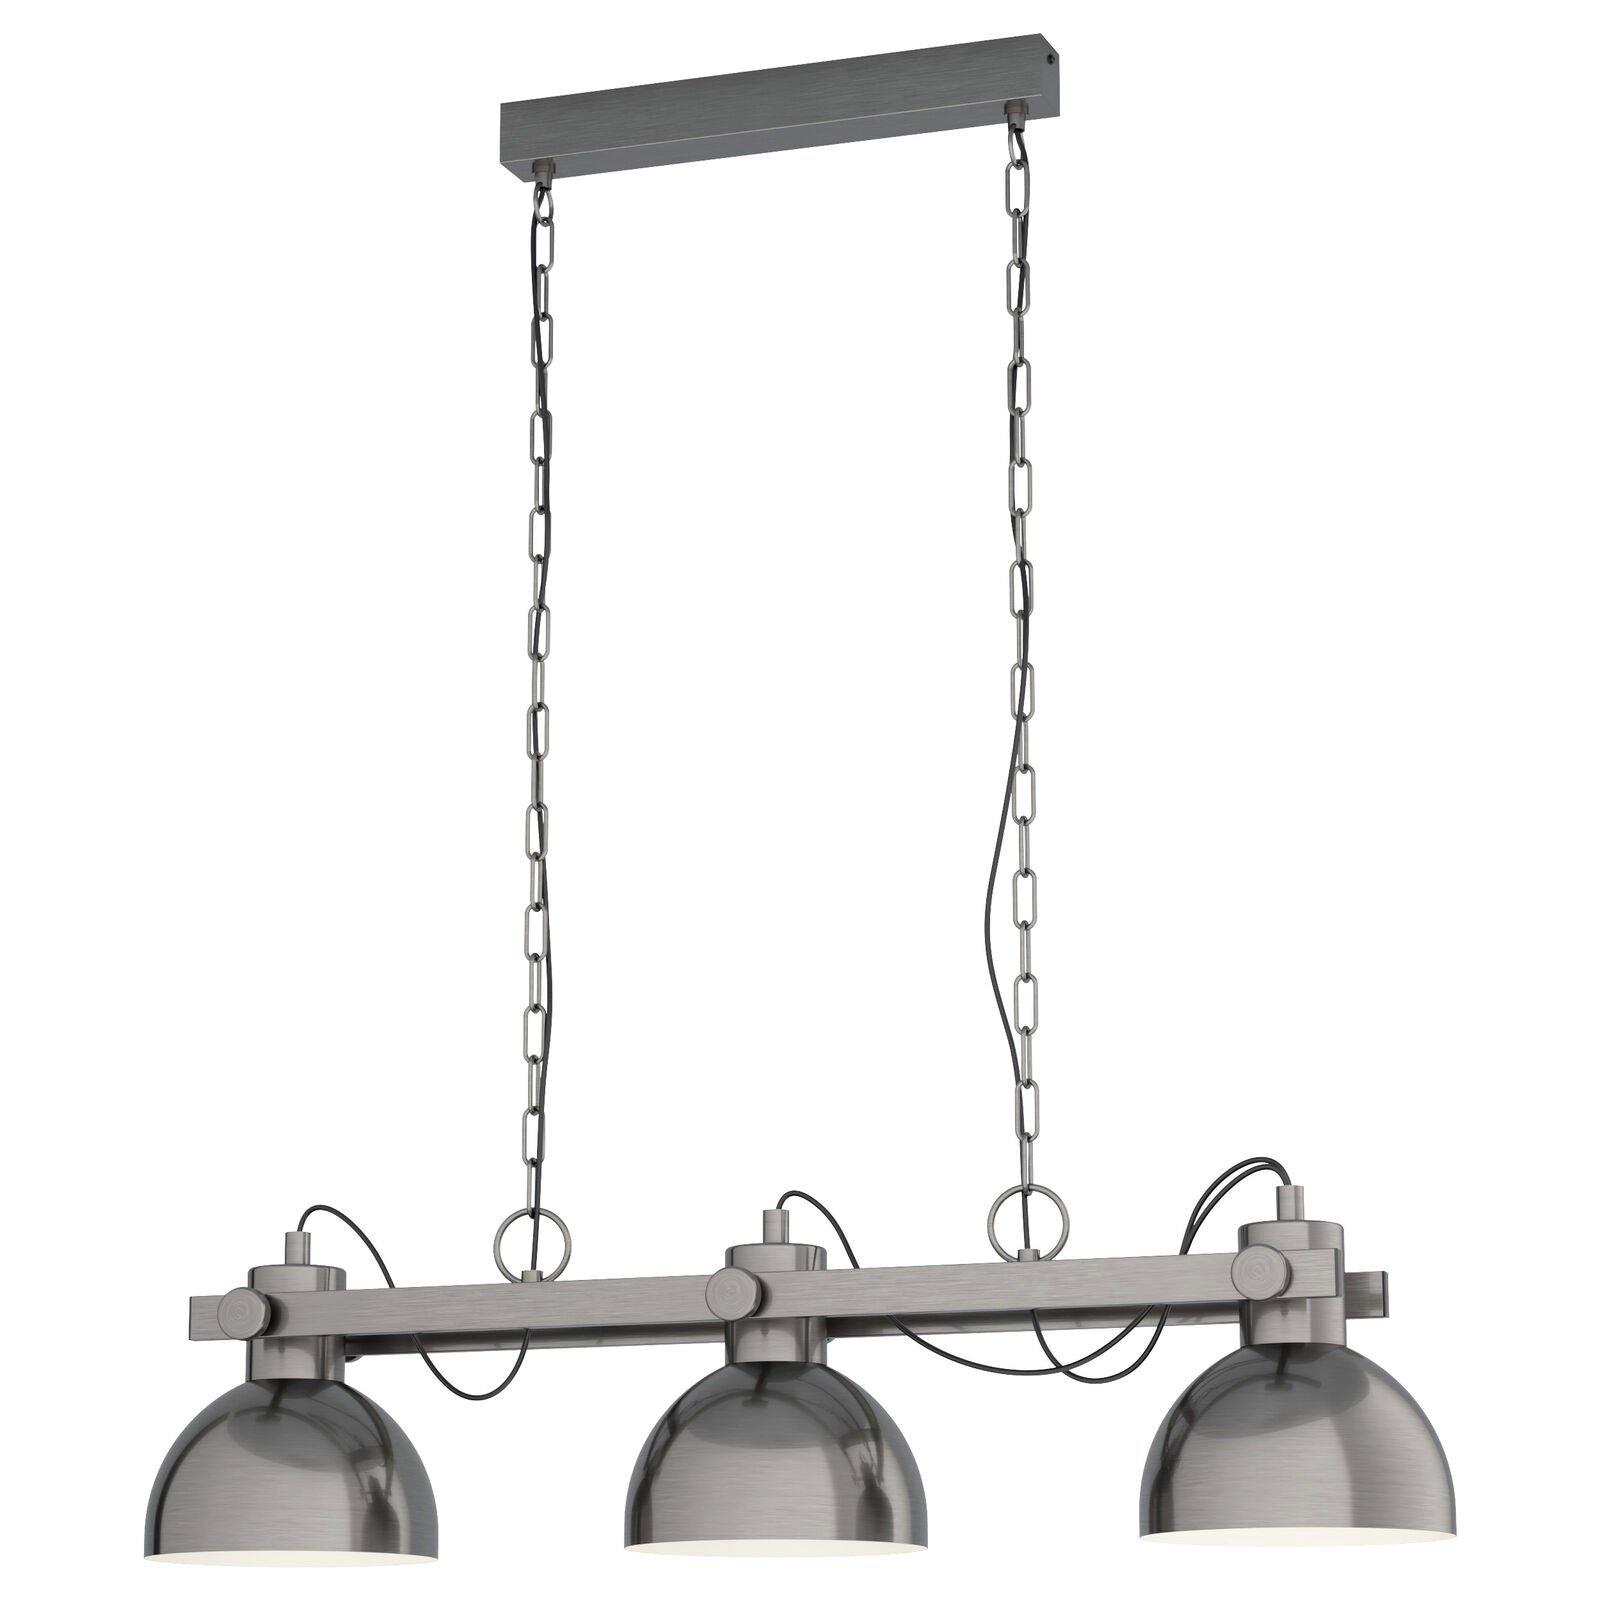 Hanging Ceiling Pendant Light Gloss Nickel Industrial Shade 3 Bulb Kitchen Lamp